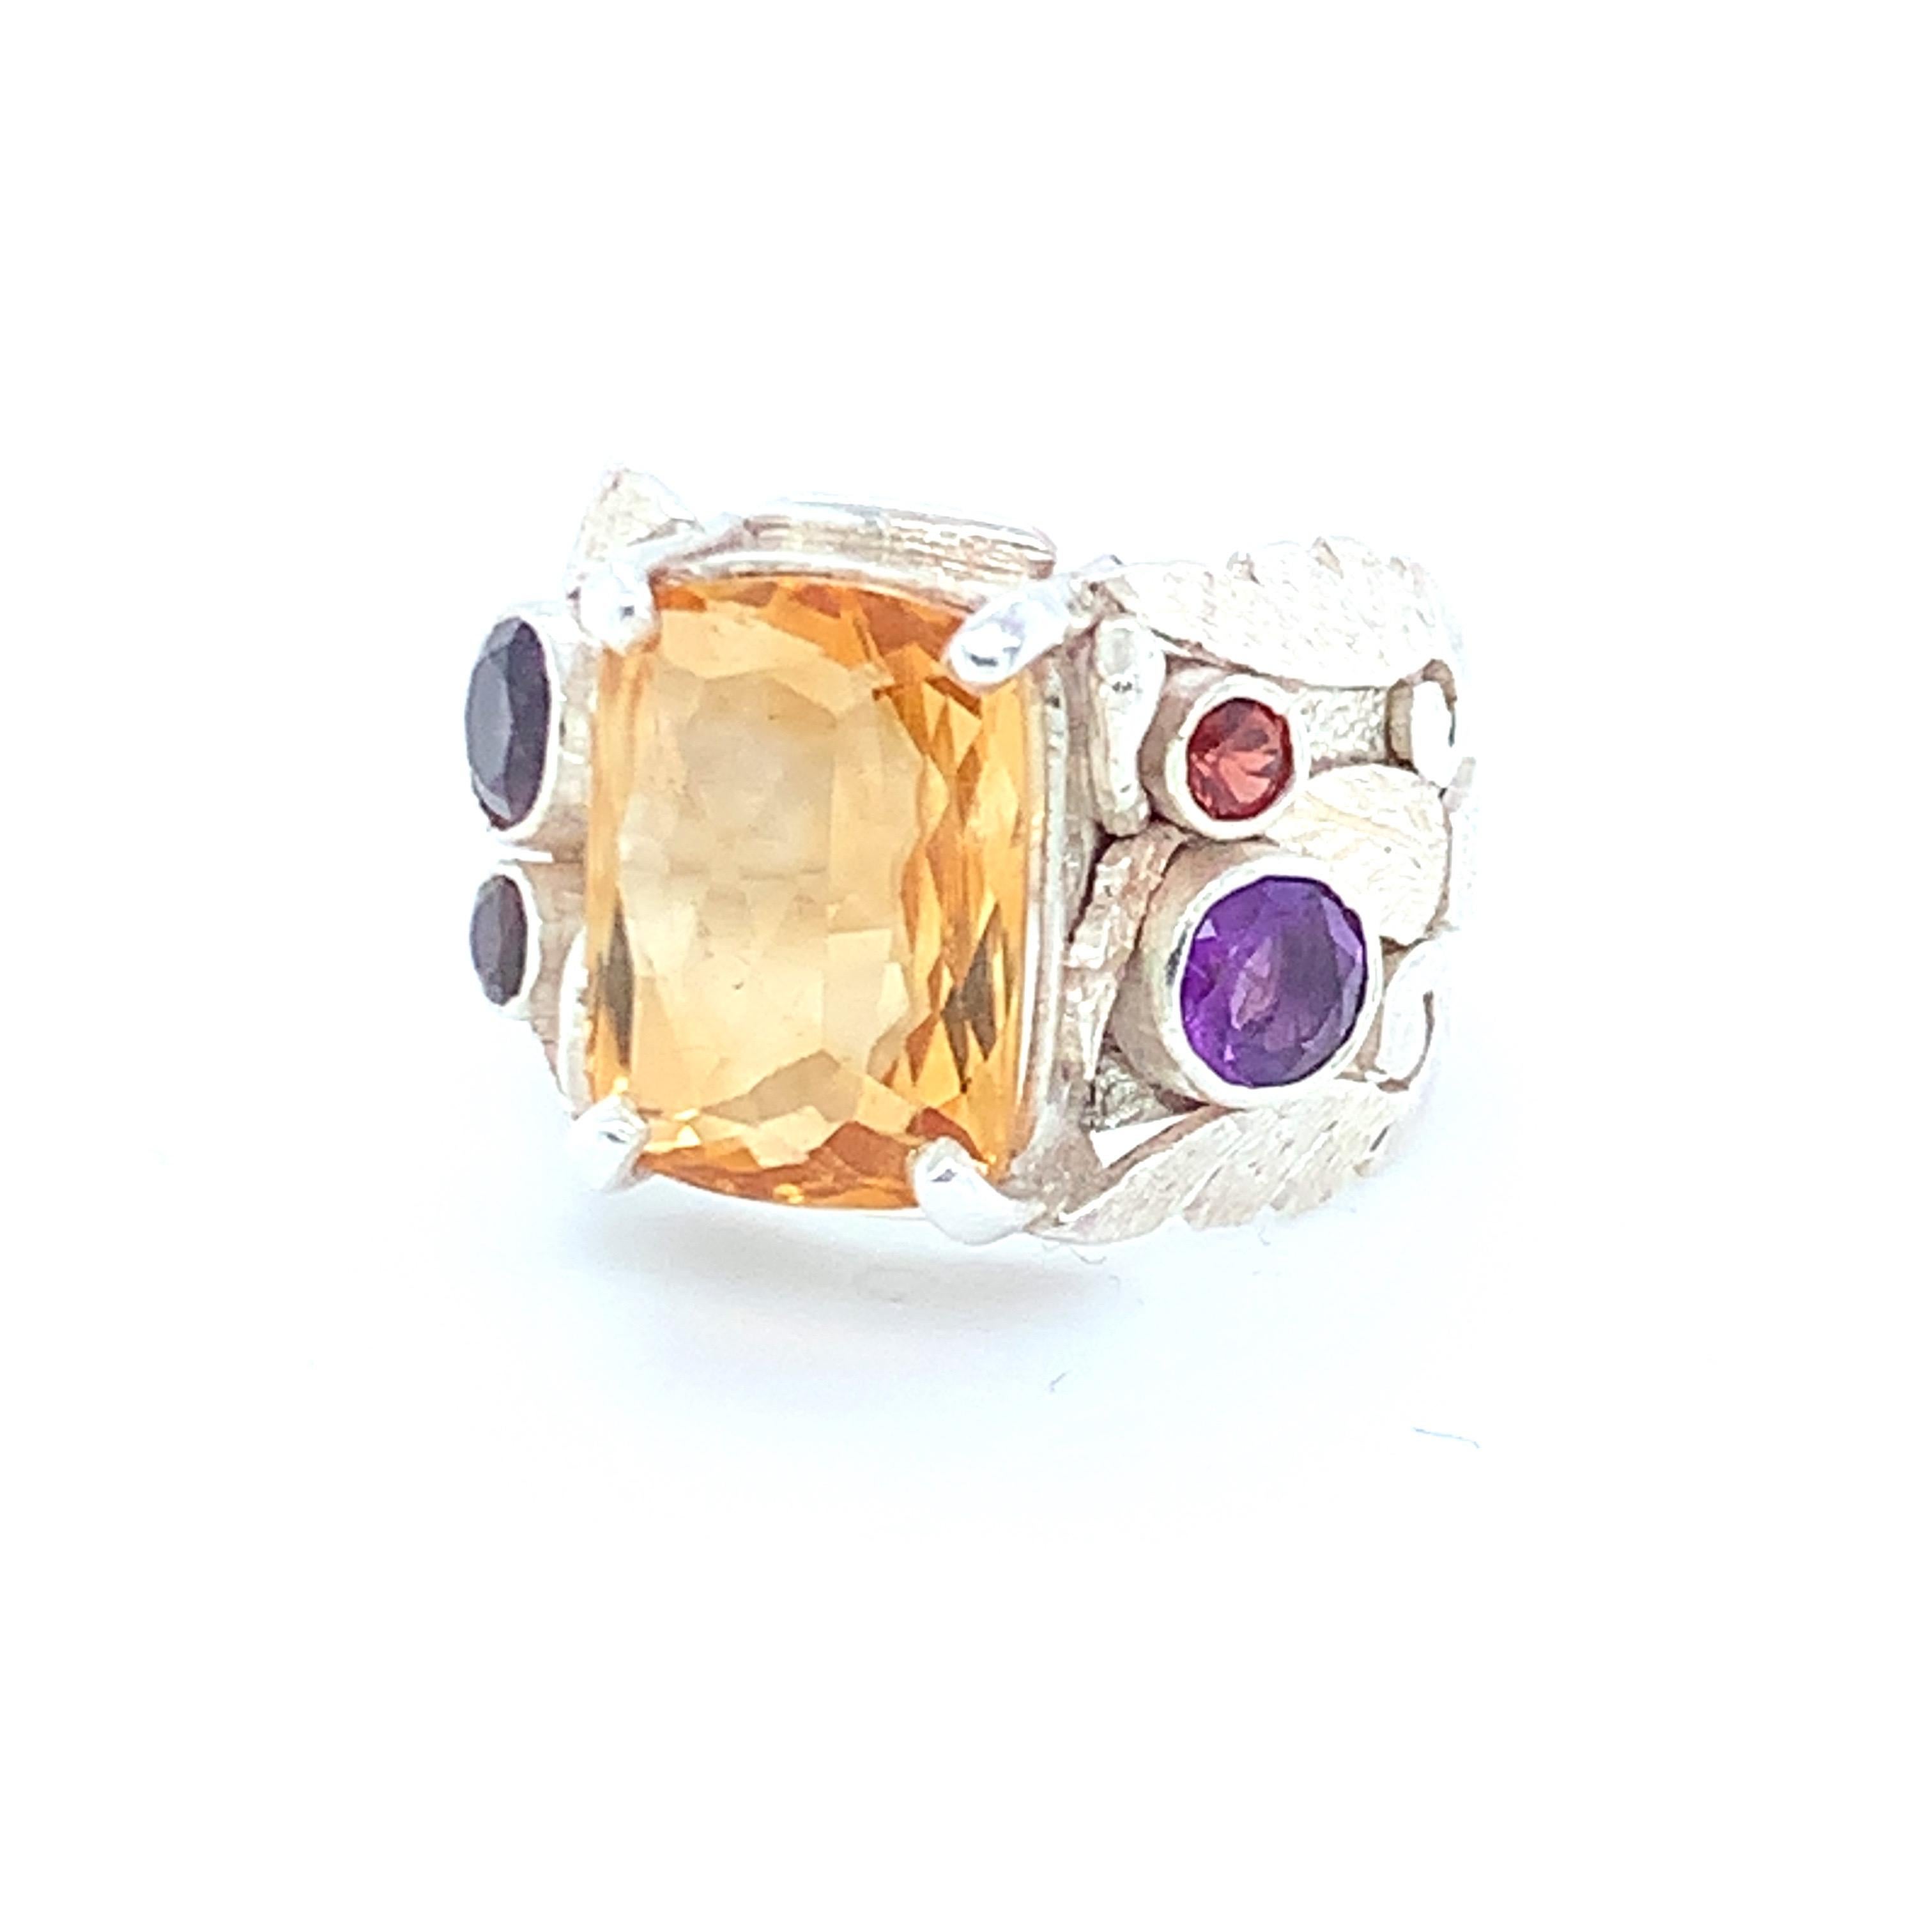 Radiant cut citrine is the main stone of this stunning, one of a kind cocktail ring. Round amethyst and garnet is used as accent stones on the sides with the multi layered artistic motifs. Set in sterling silver and carefully crafted with